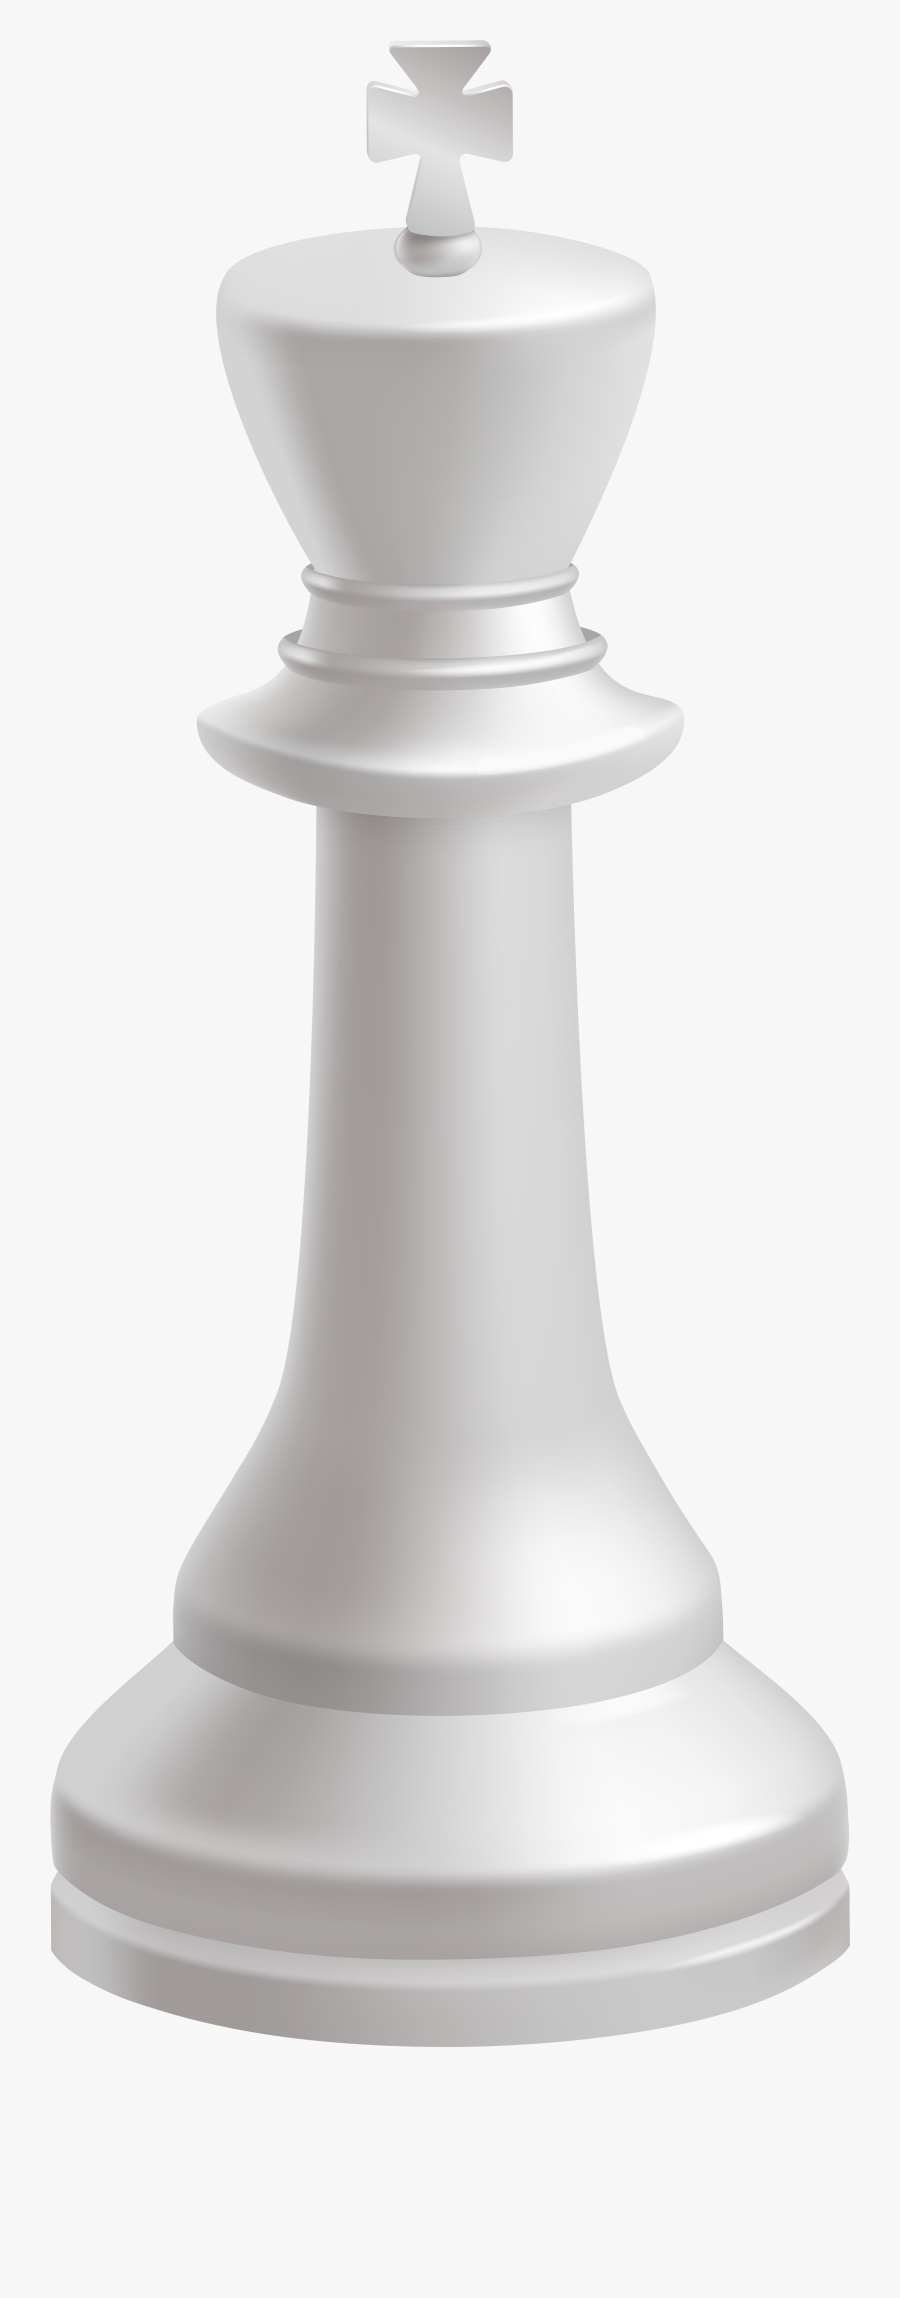 King White Chess Piece Png Clip Art - Chess Piece King Png, Transparent Clipart